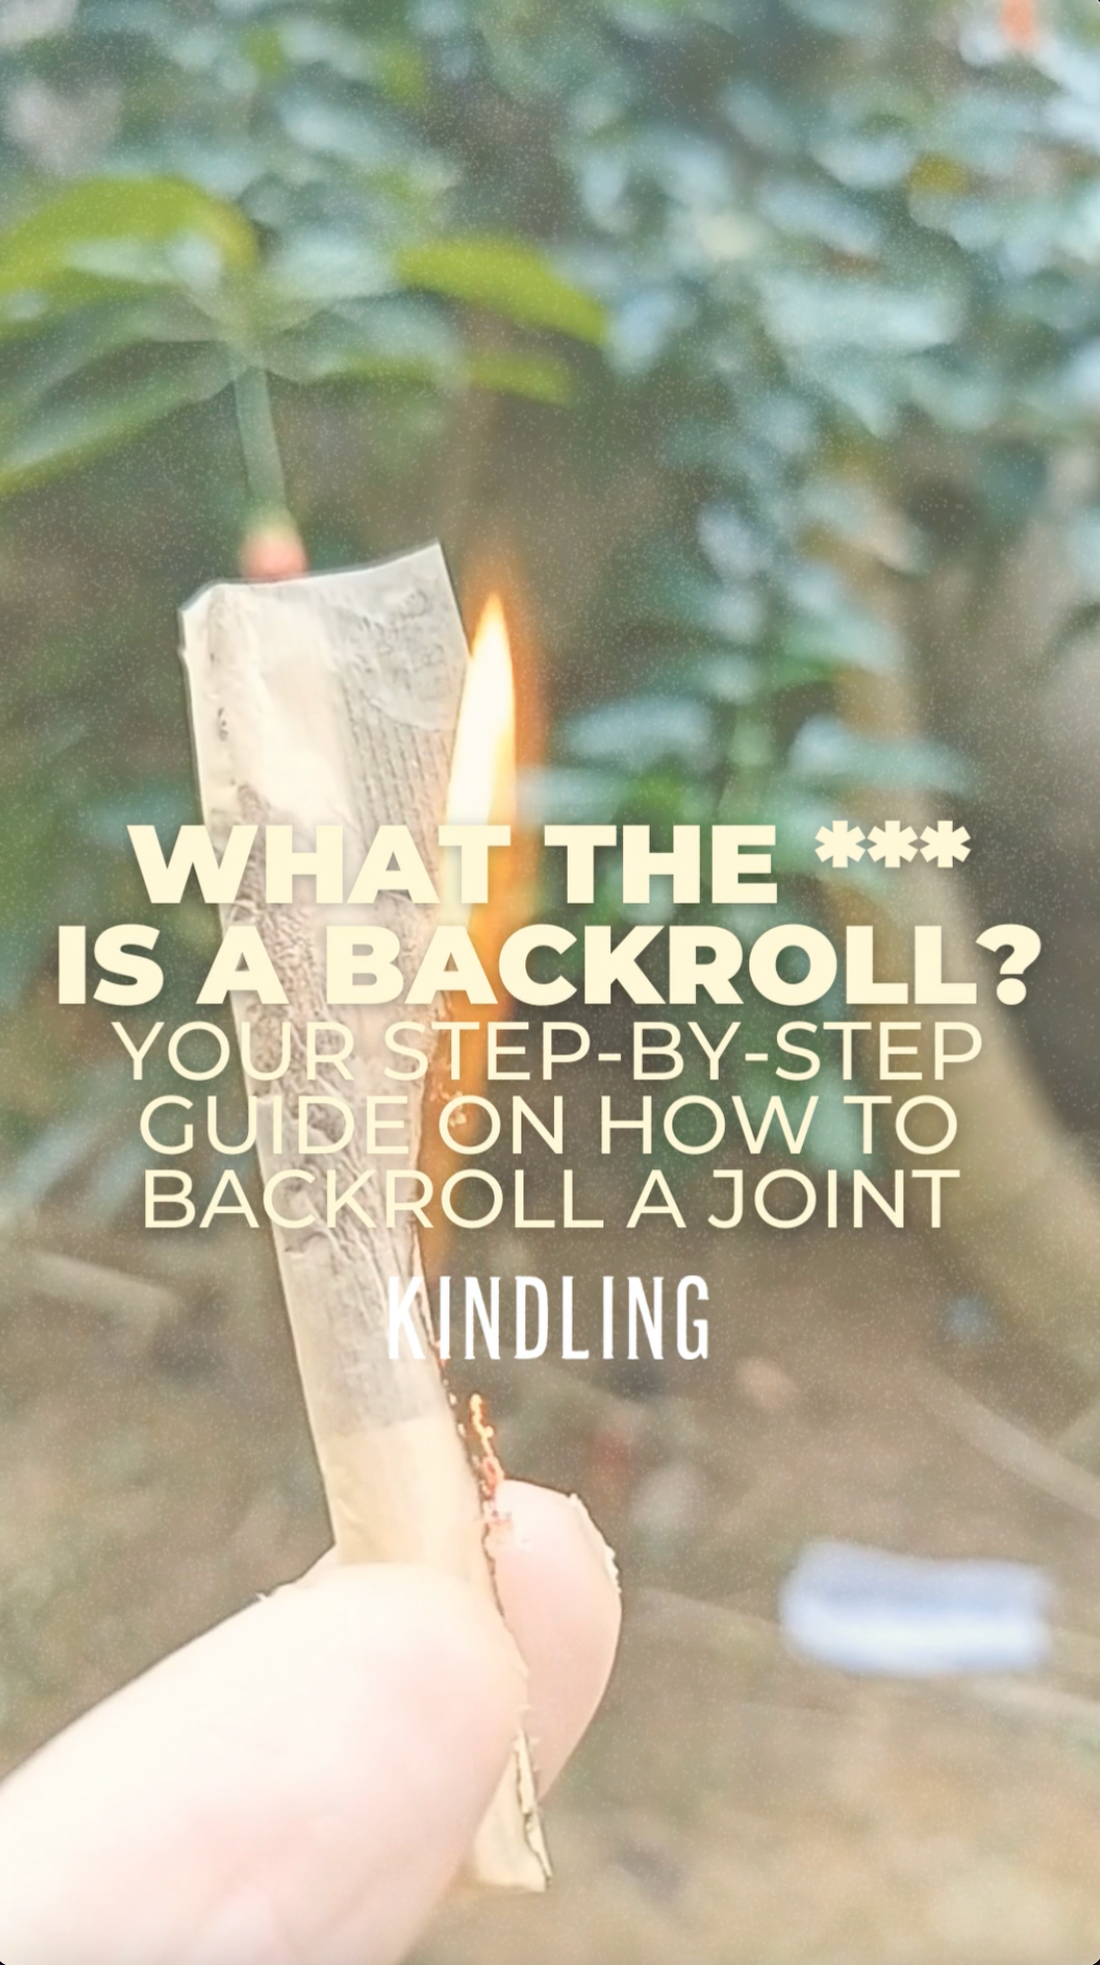 Your Guide to Backrolling a Joint